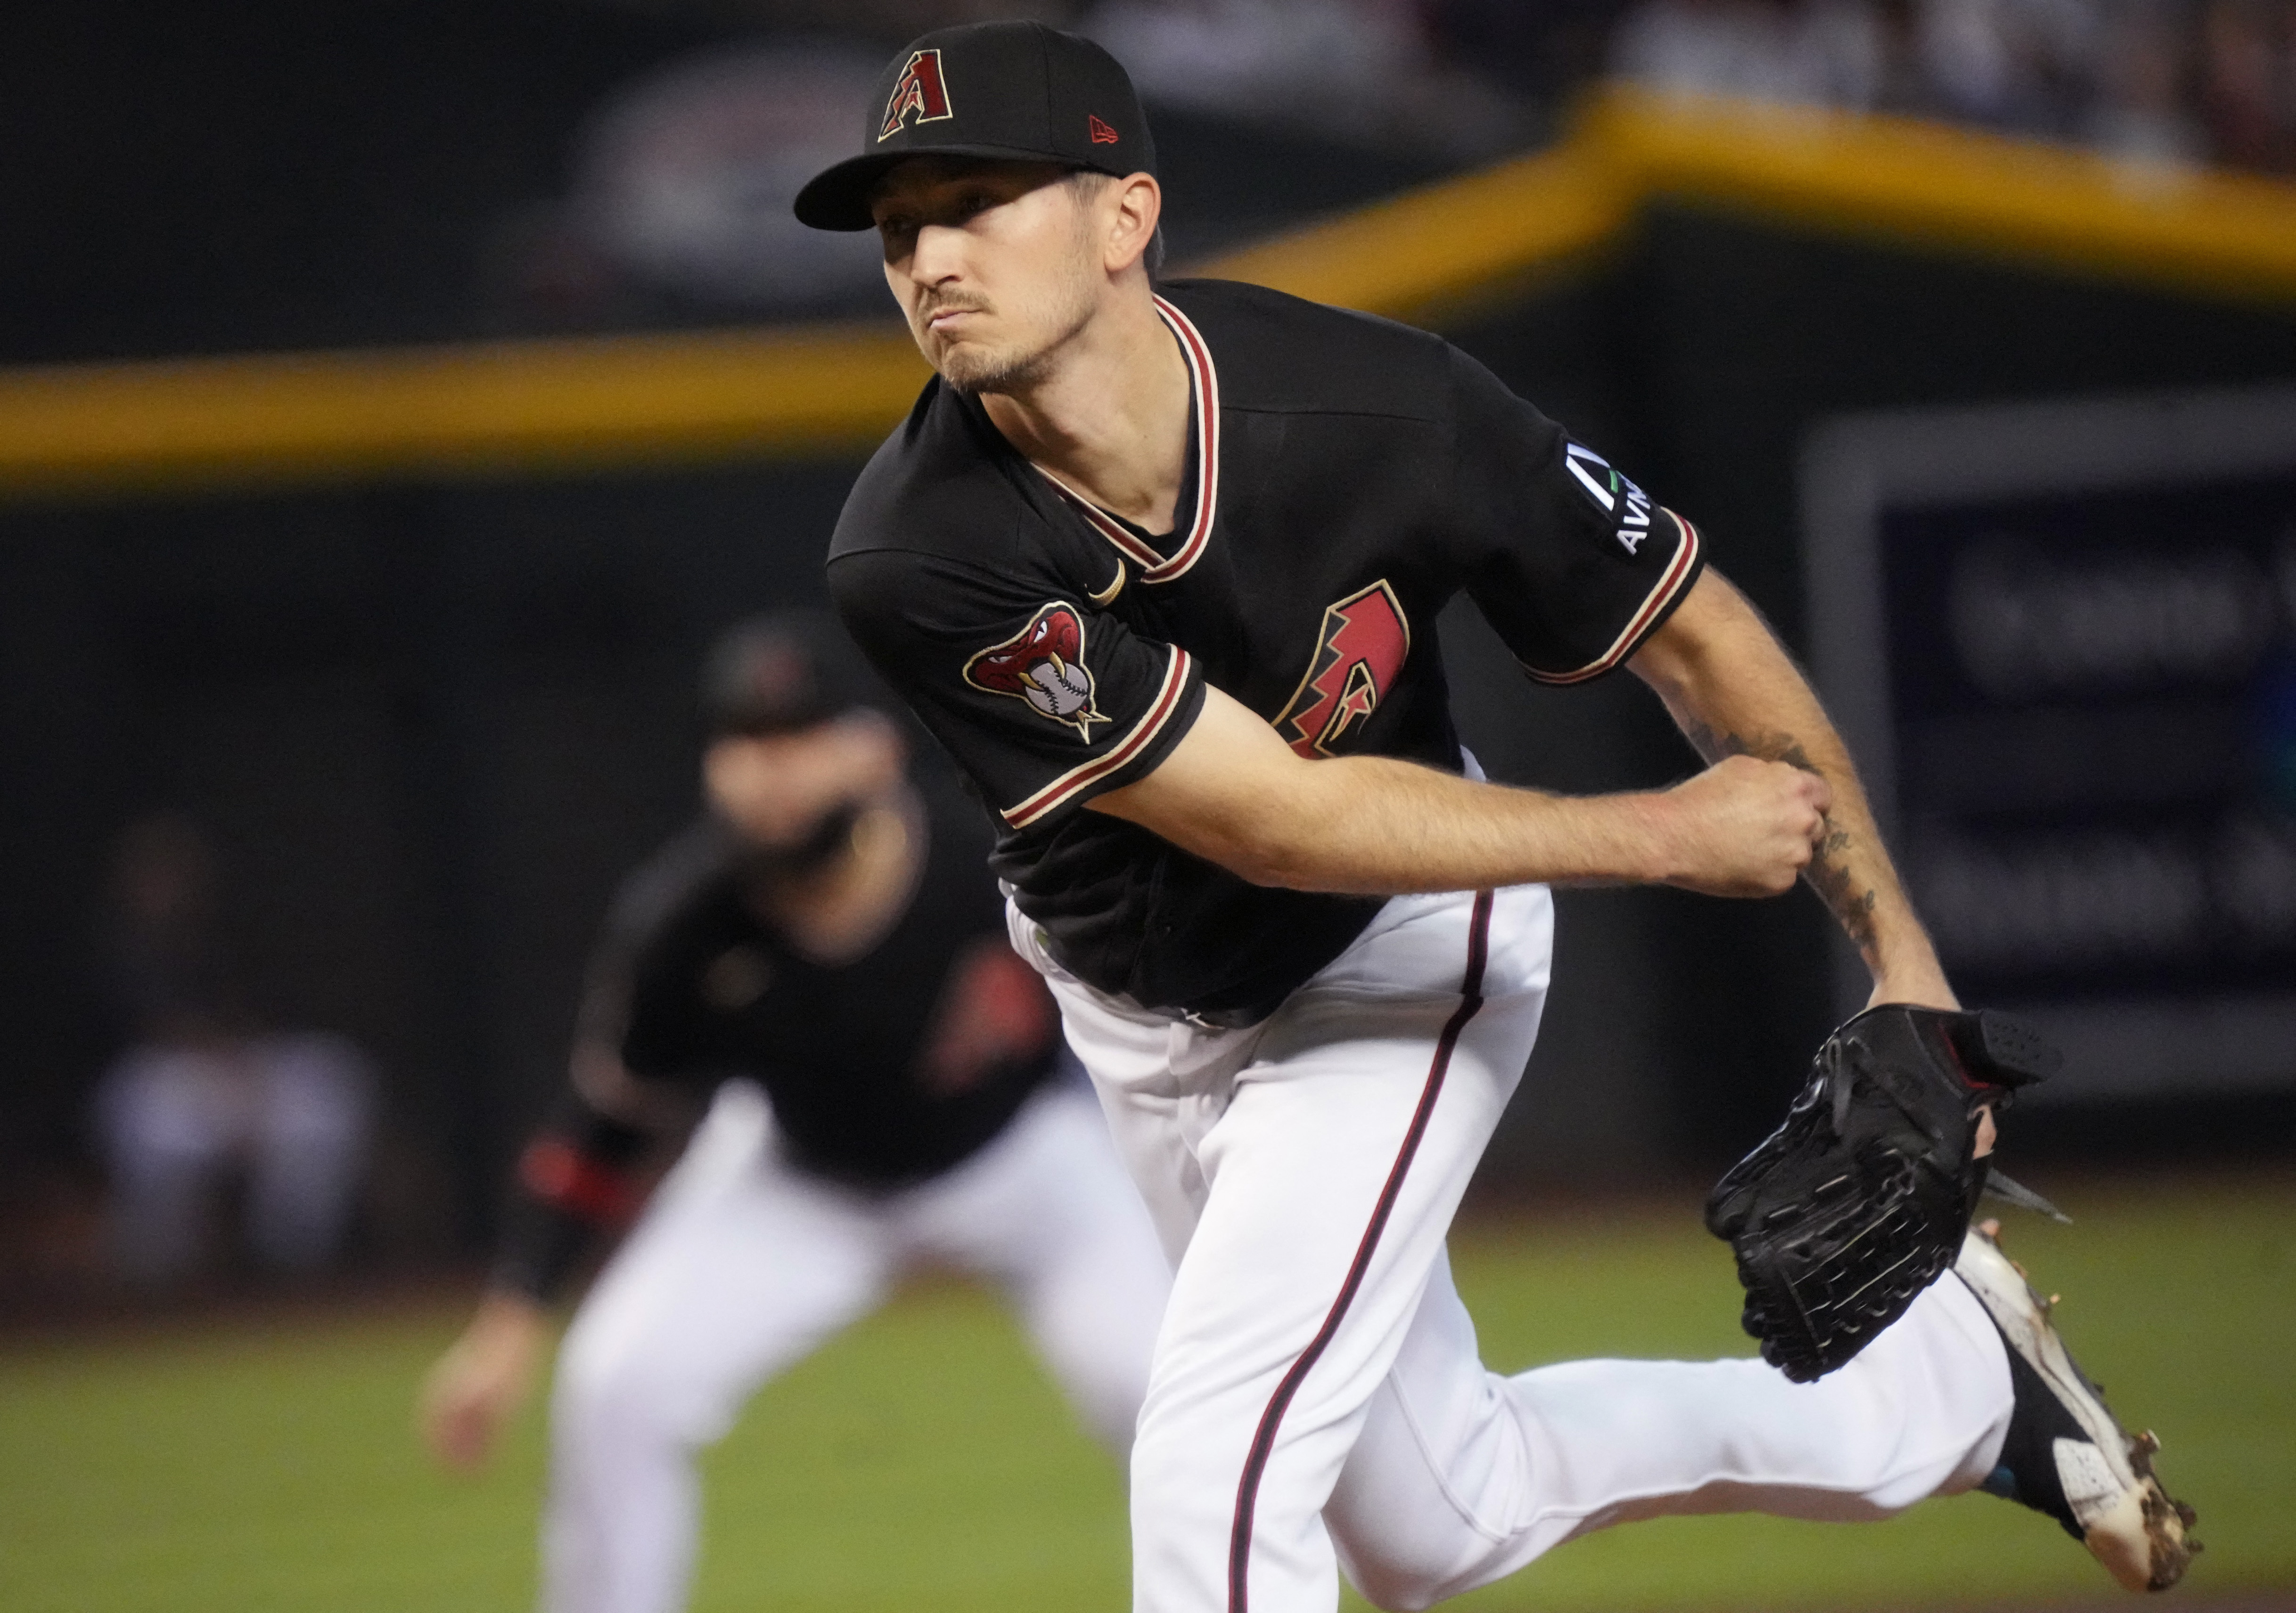 Pirates bullpen, defense come up short in loss to Diamondbacks; still  searching for 1st series win in May